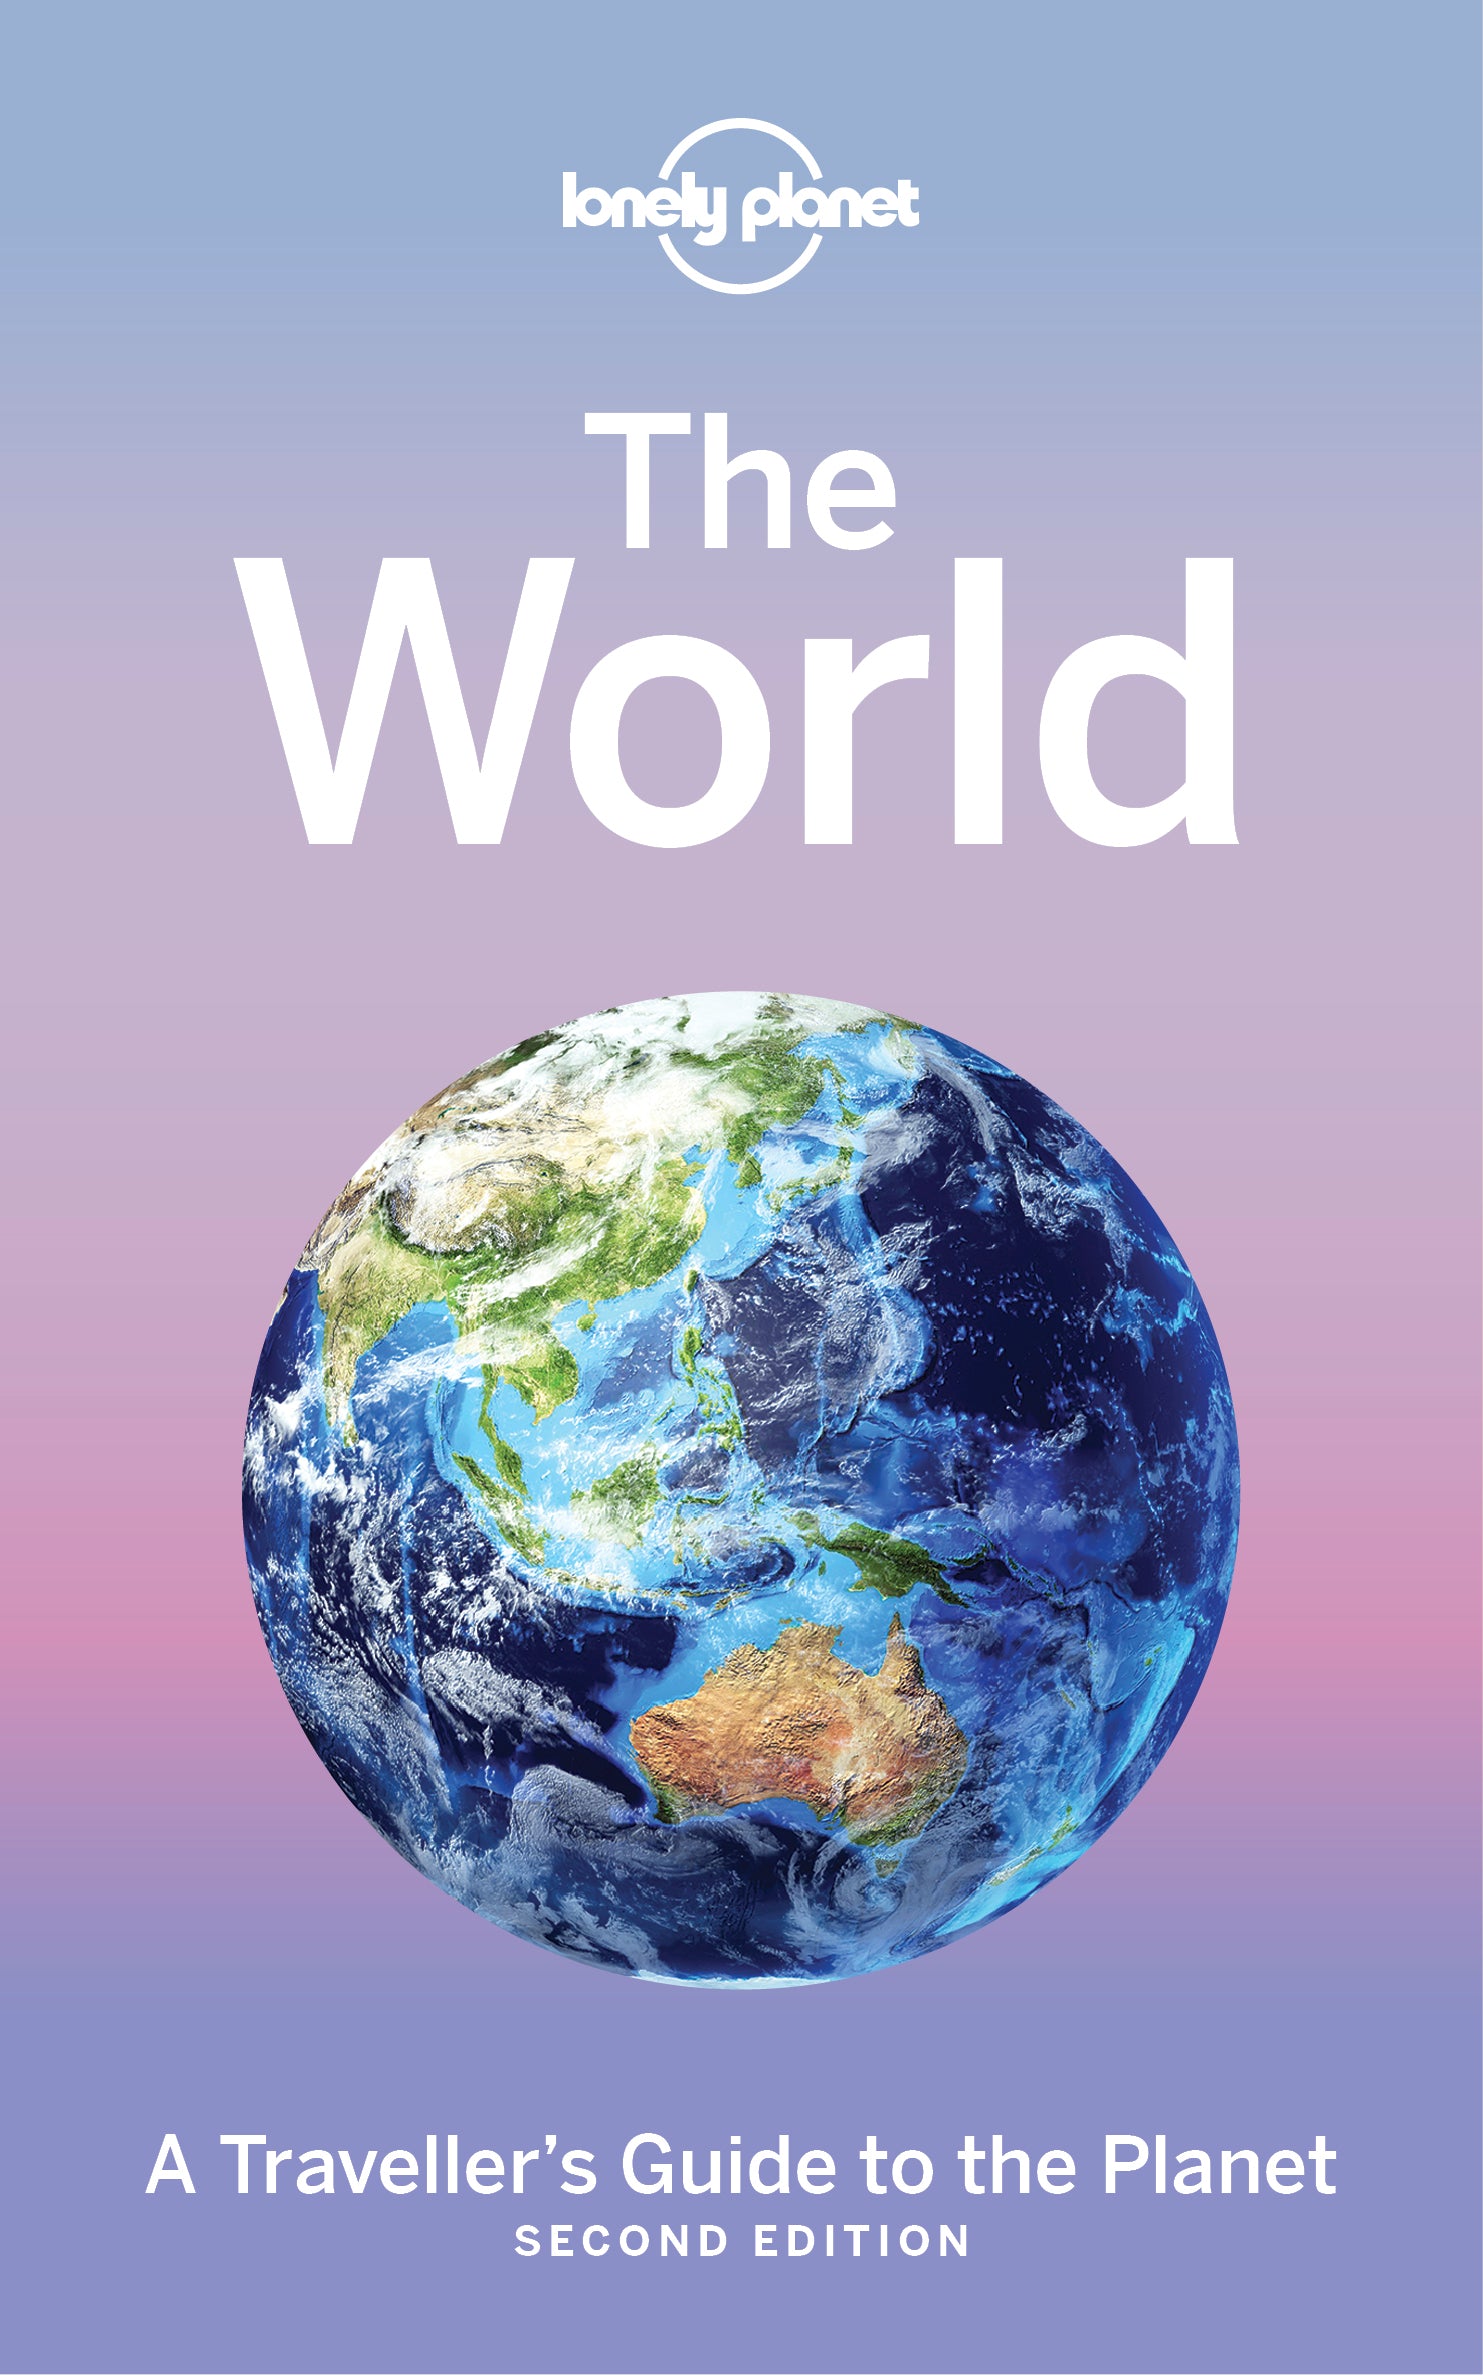 The World (Lonely Planet's Guide to)